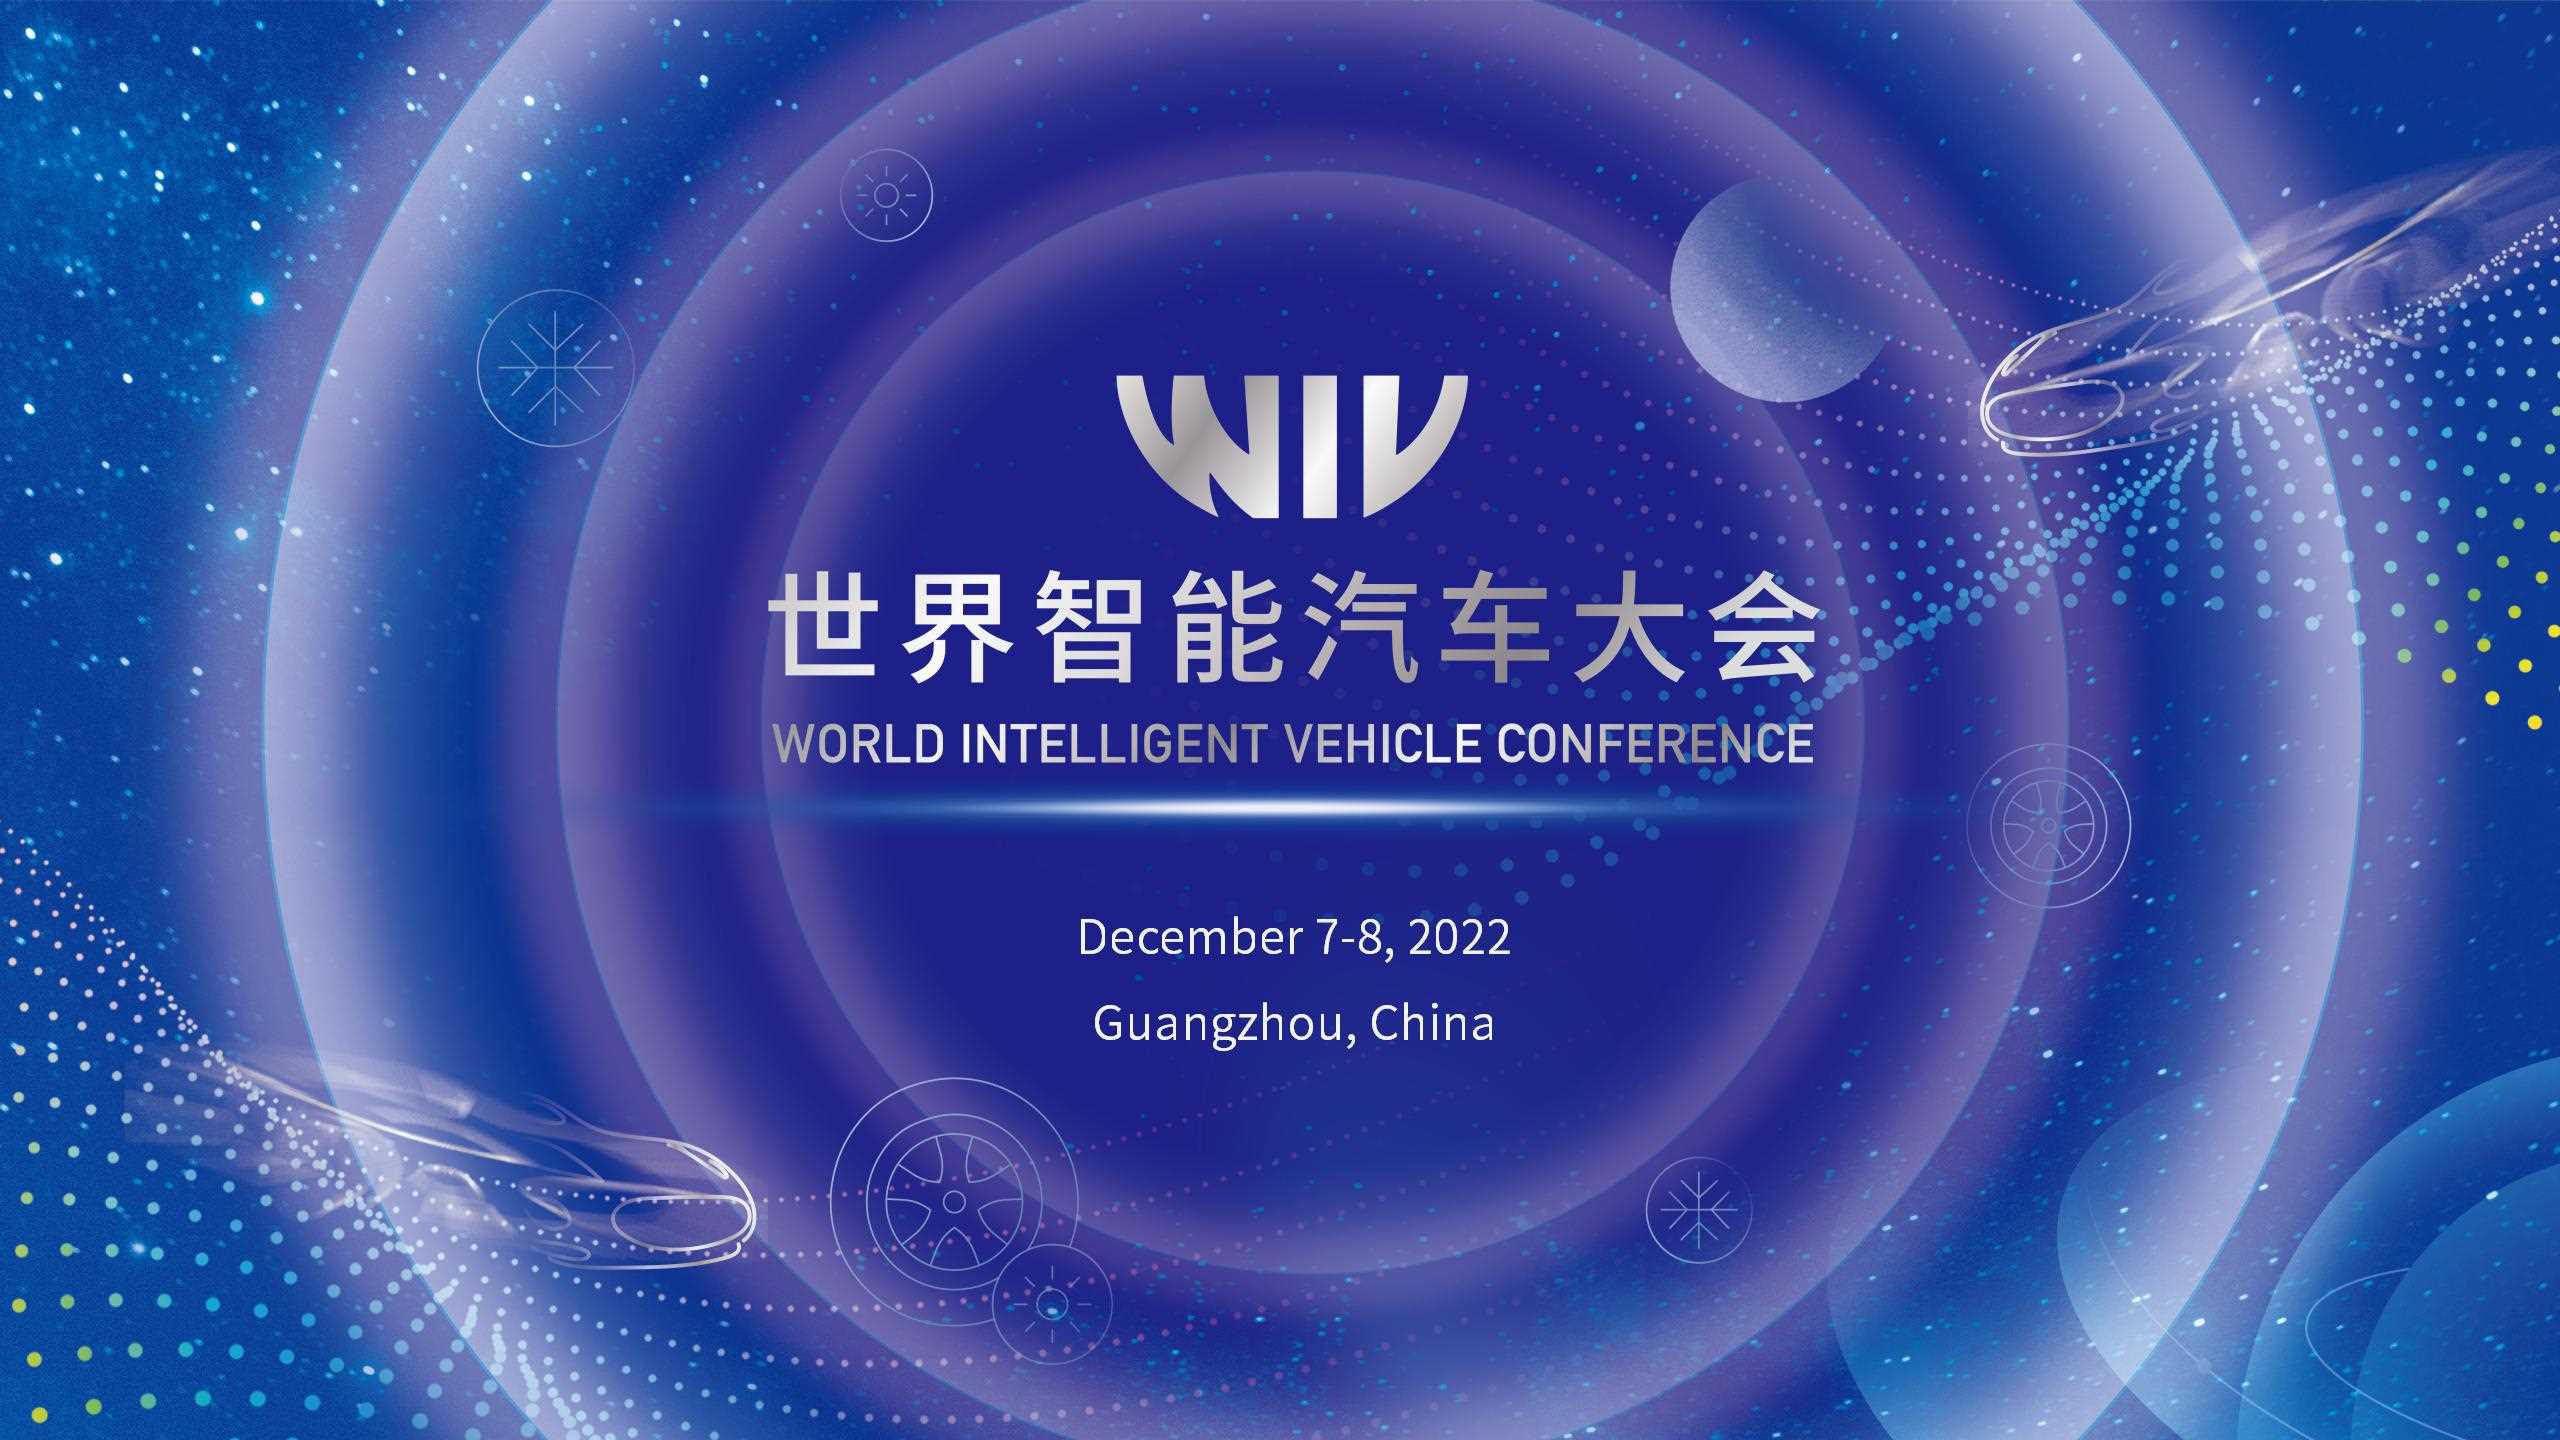 2022 WORLD INTELLIGENT VEHICLE CONFERENCE INTRODUCTION